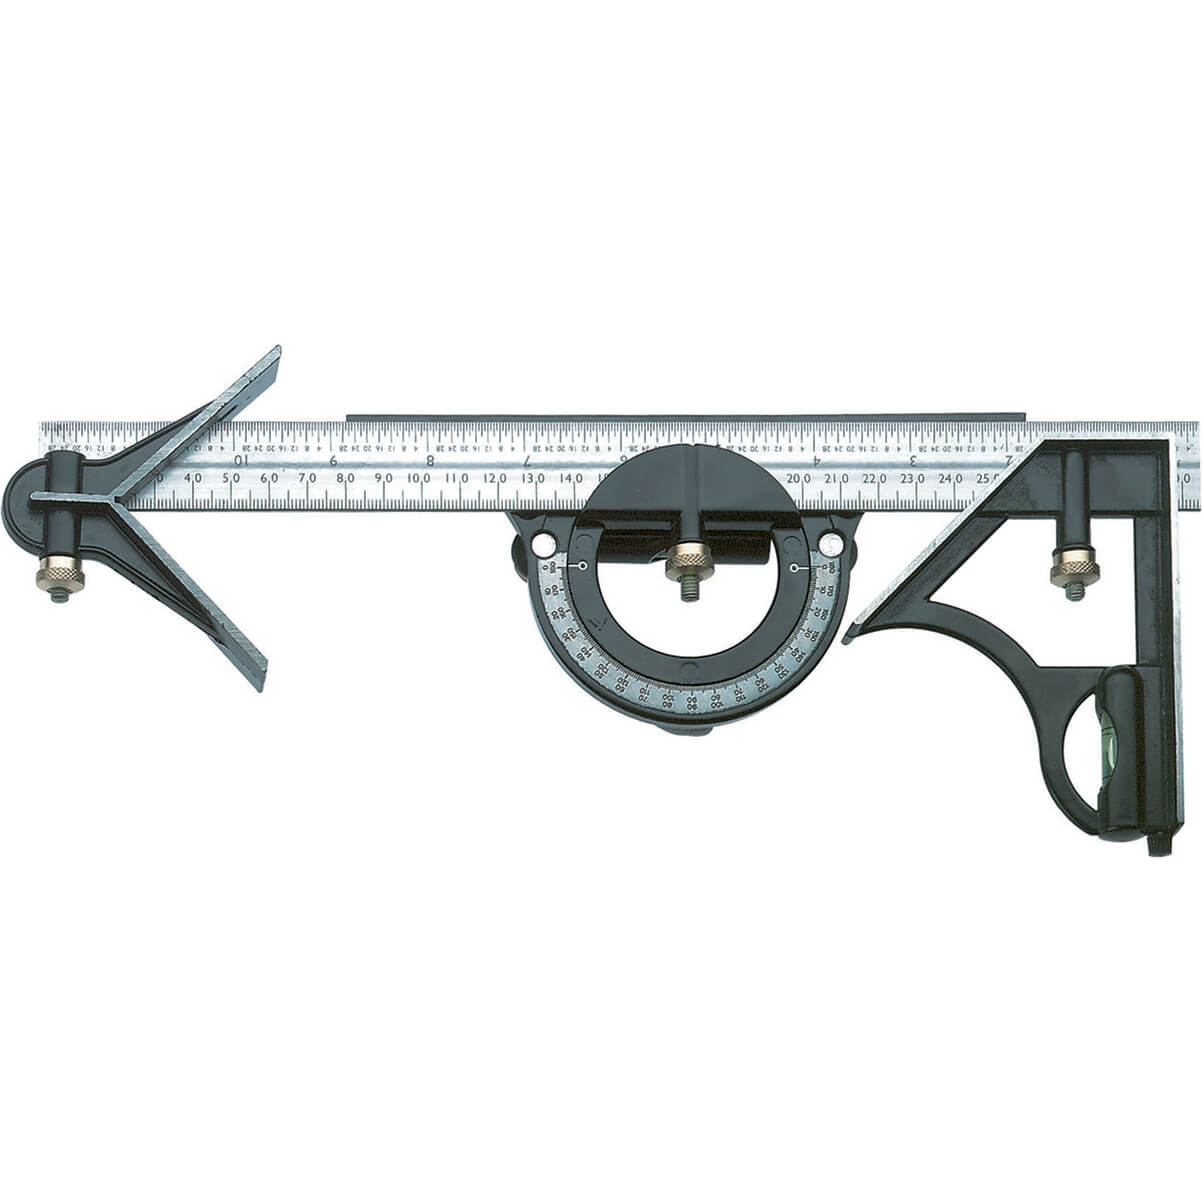 Image of CK Combination Square Set 300mm